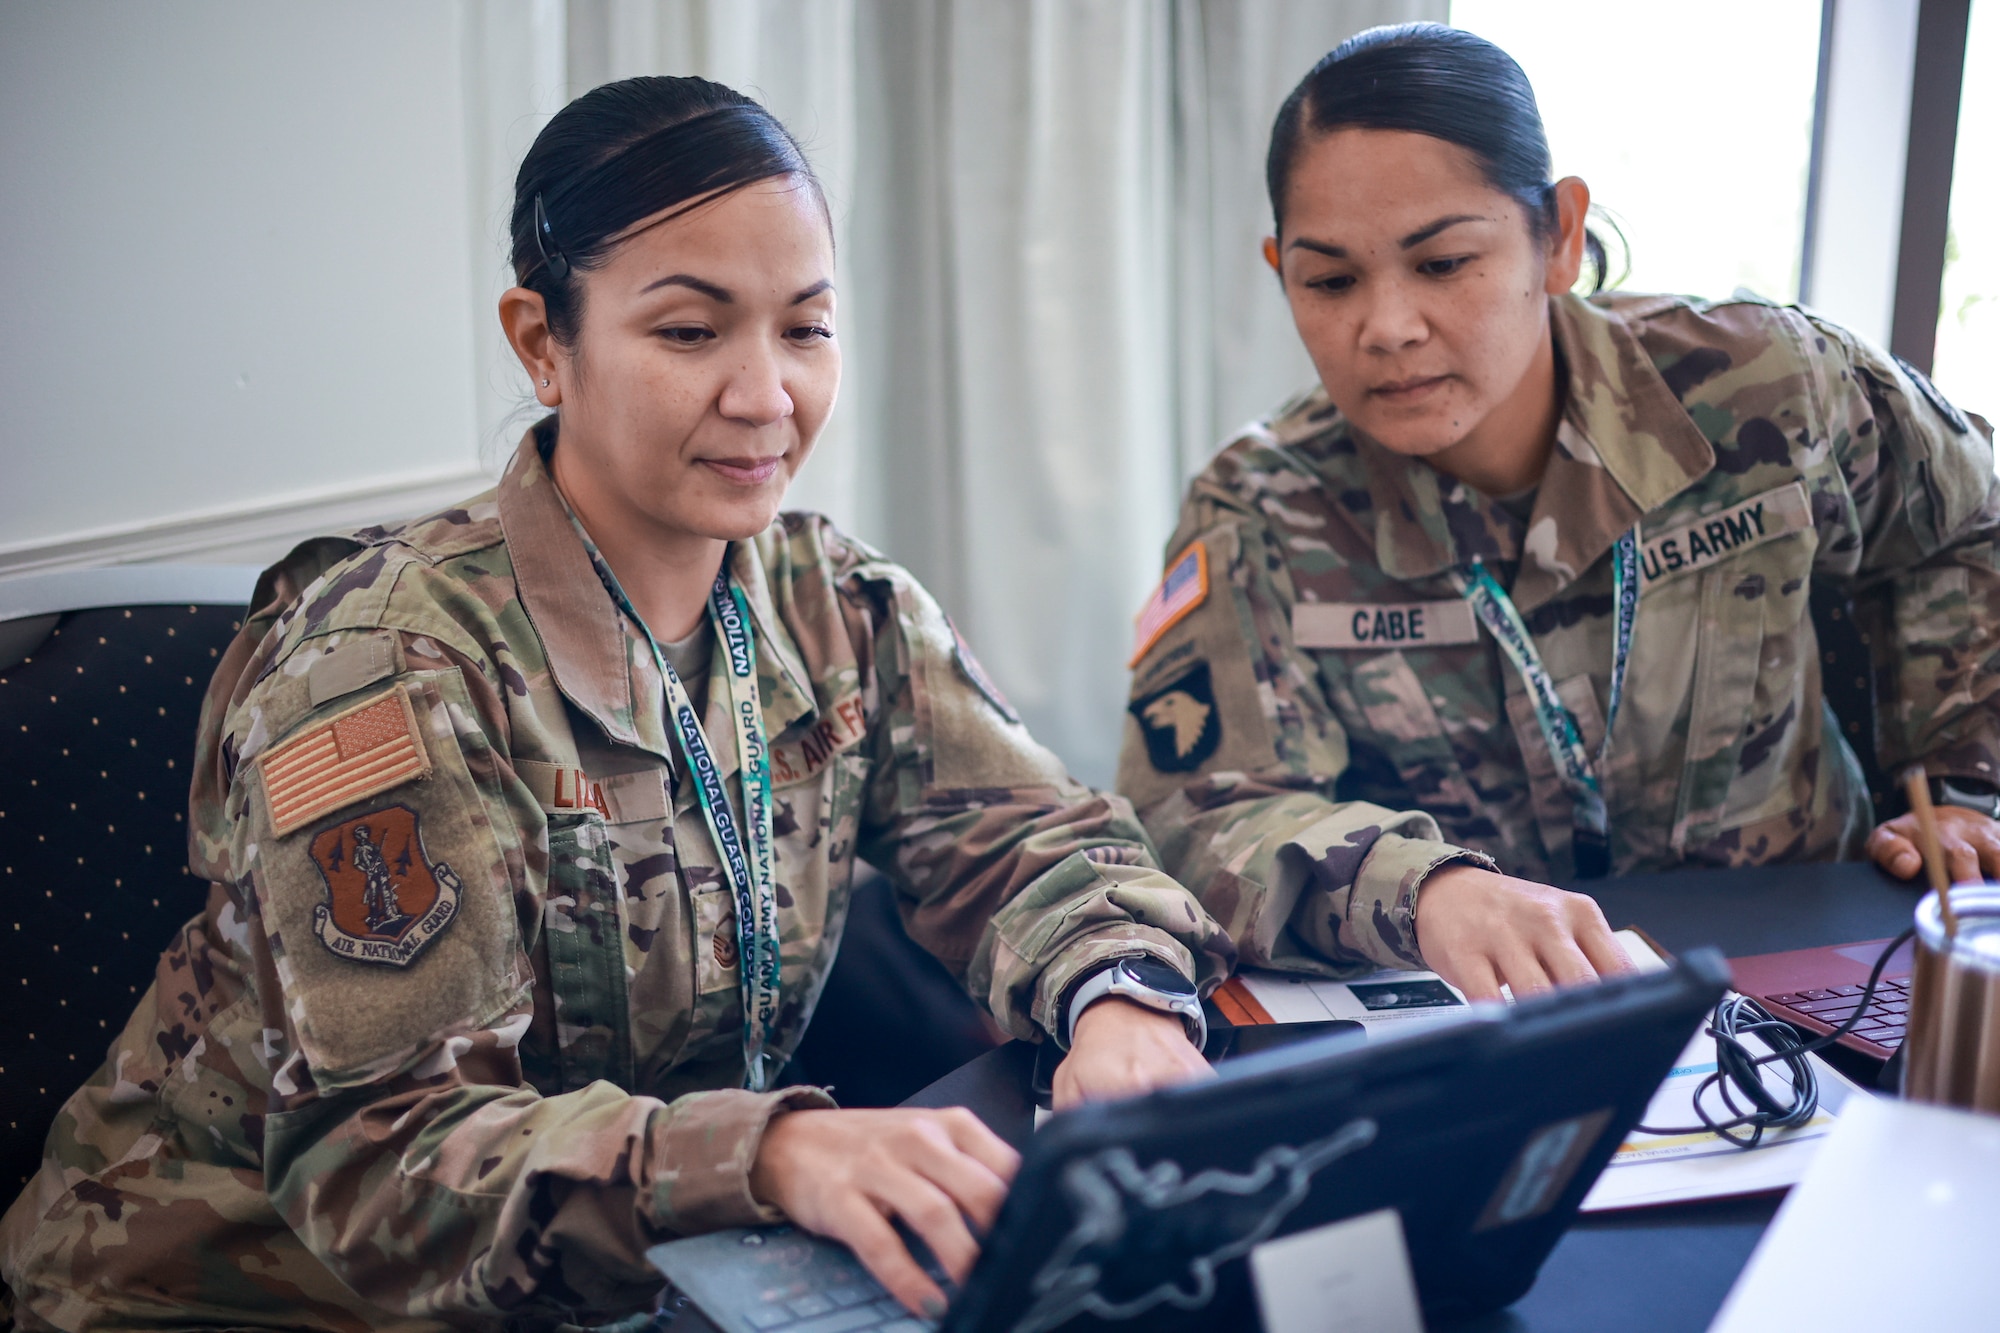 U.S. Air Force Master Sgt. Christine Lizama, left, and U.S. Army Sgt. 1st Class Jolina Cabe, both assigned to the Guam National Guard, attend a cybersecurity conference in Tumon, Guam, July 18, 2023. The conference was the first in a series of collaborations to develop, implement and sustain a unified cybersecurity plan for the U.S. territory in the Western Pacific.